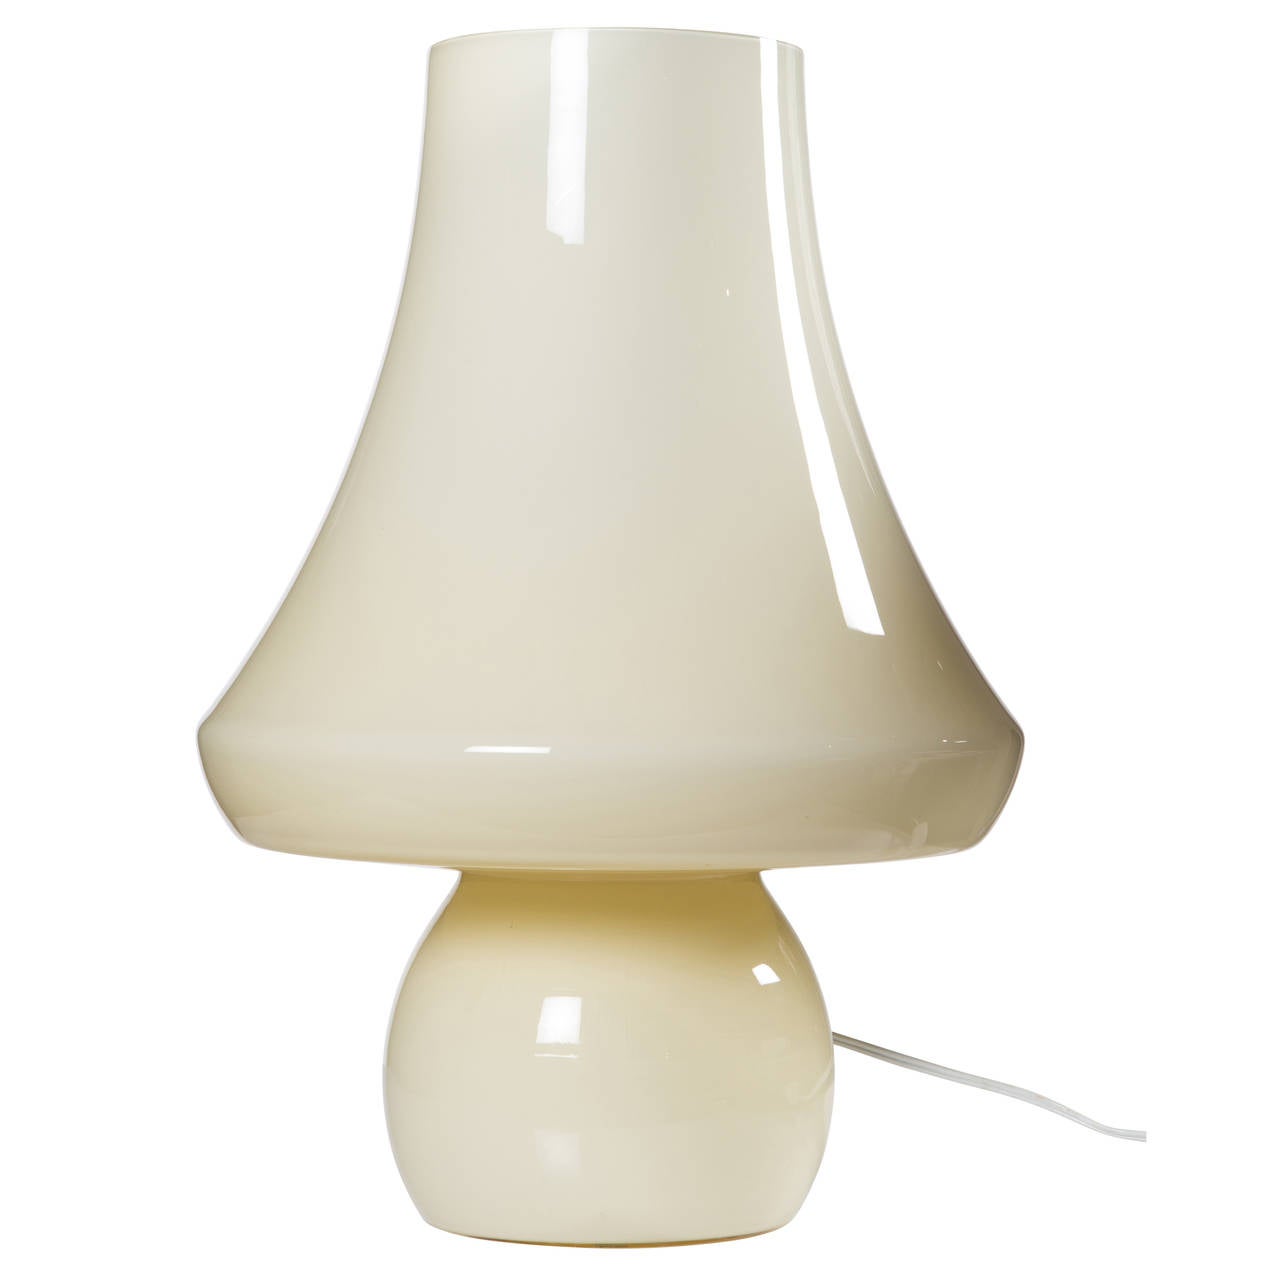 Pair of off-white glass table lamps, single form with no seams.